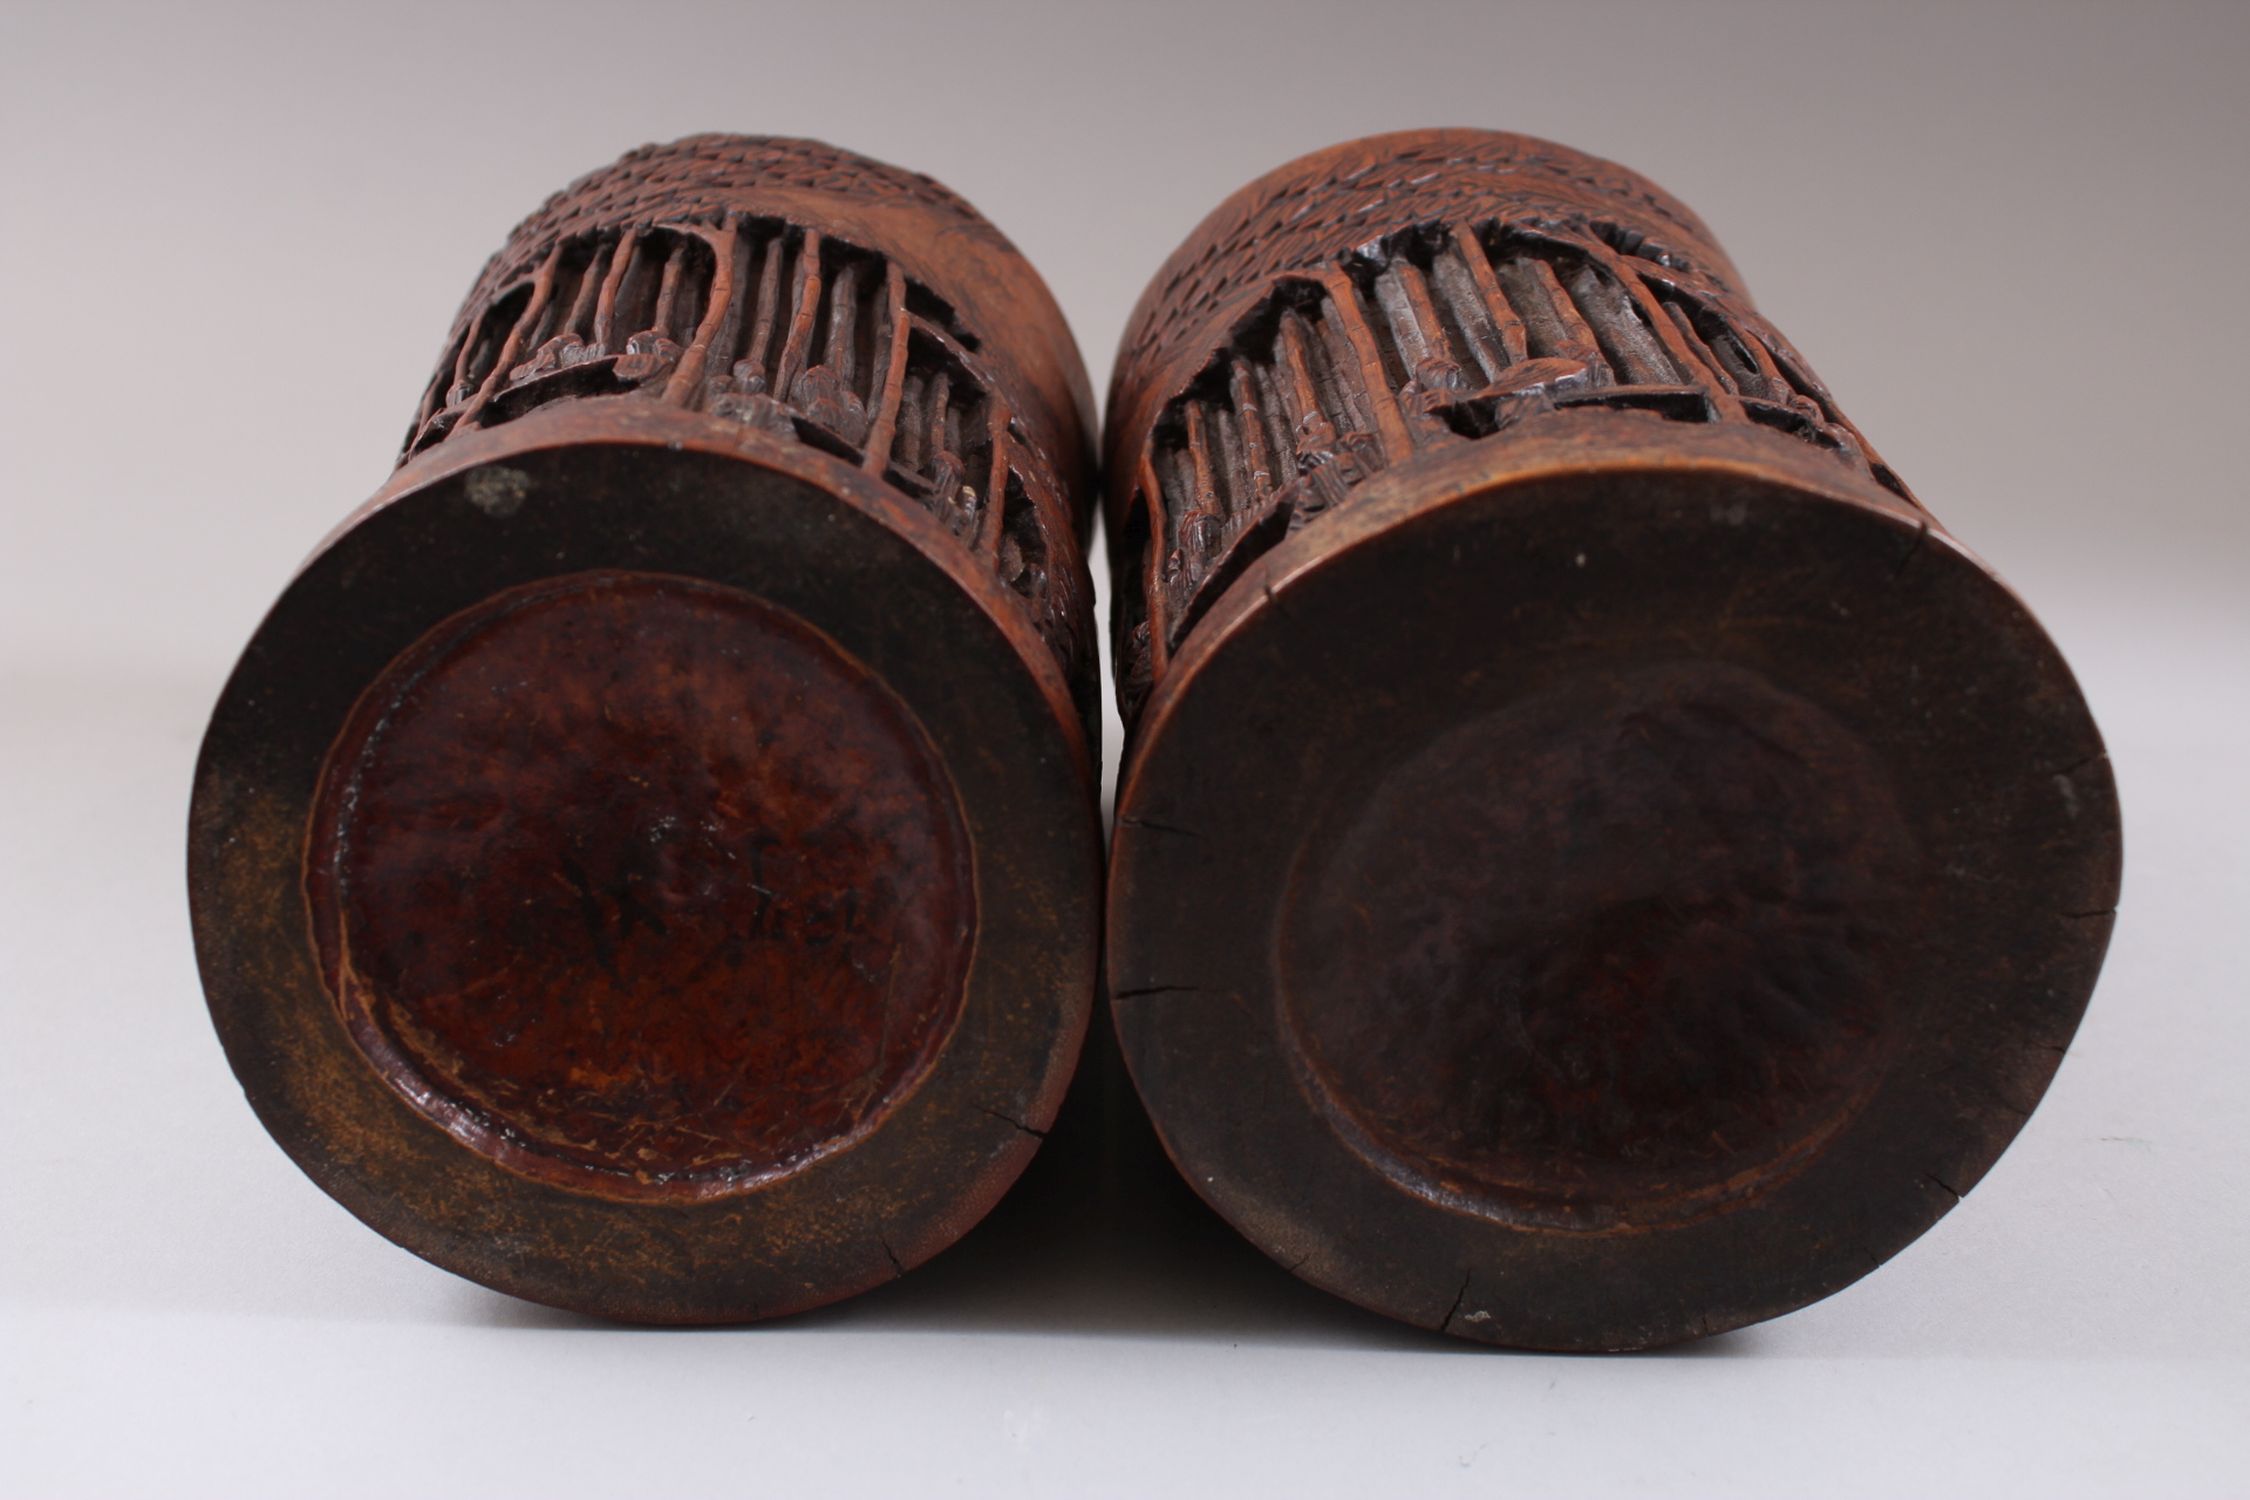 A PAIR OF CHINESE 19TH CENTURY BAMBOO CARVED BRUSH POTS, carved deeply to depict scenes of figures - Image 3 of 3